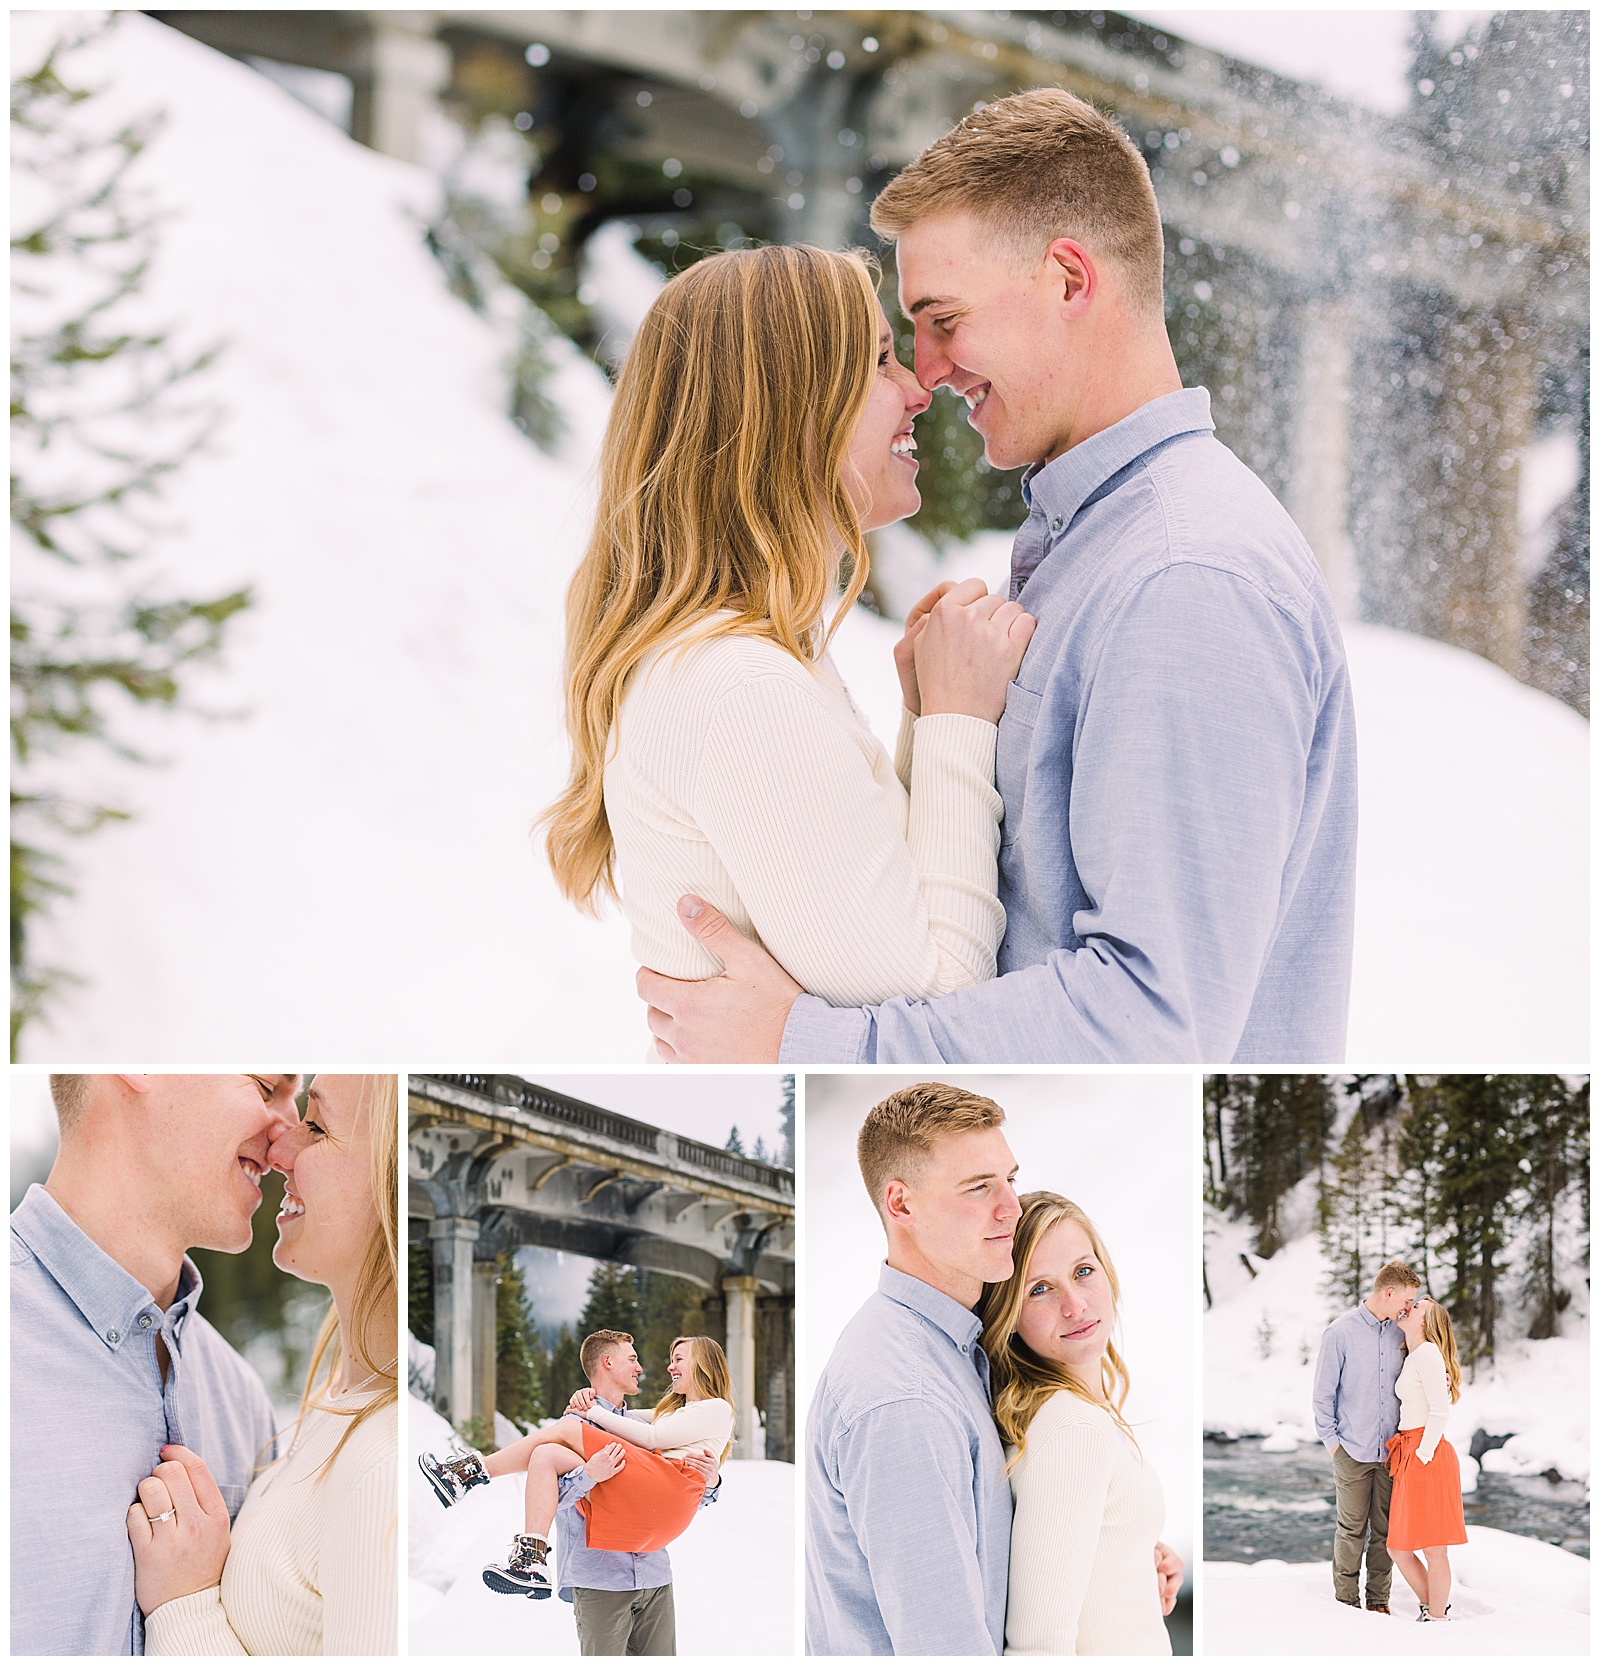 a winter engagement session in the snowy mountains of idaho.